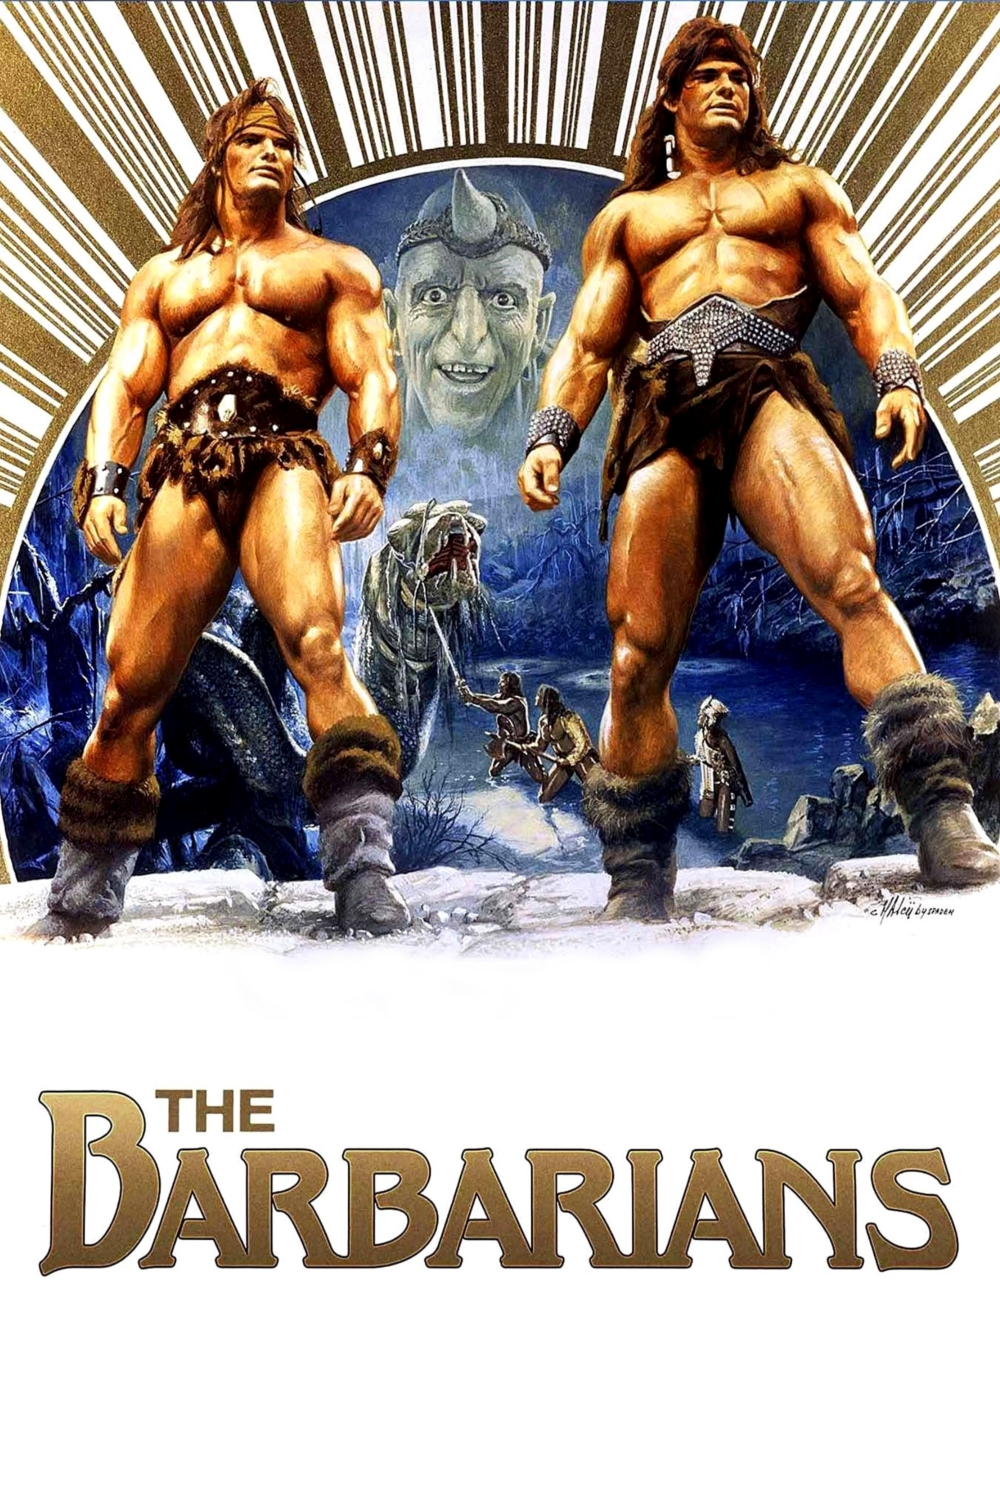 The Barbarians [HD] (1987)